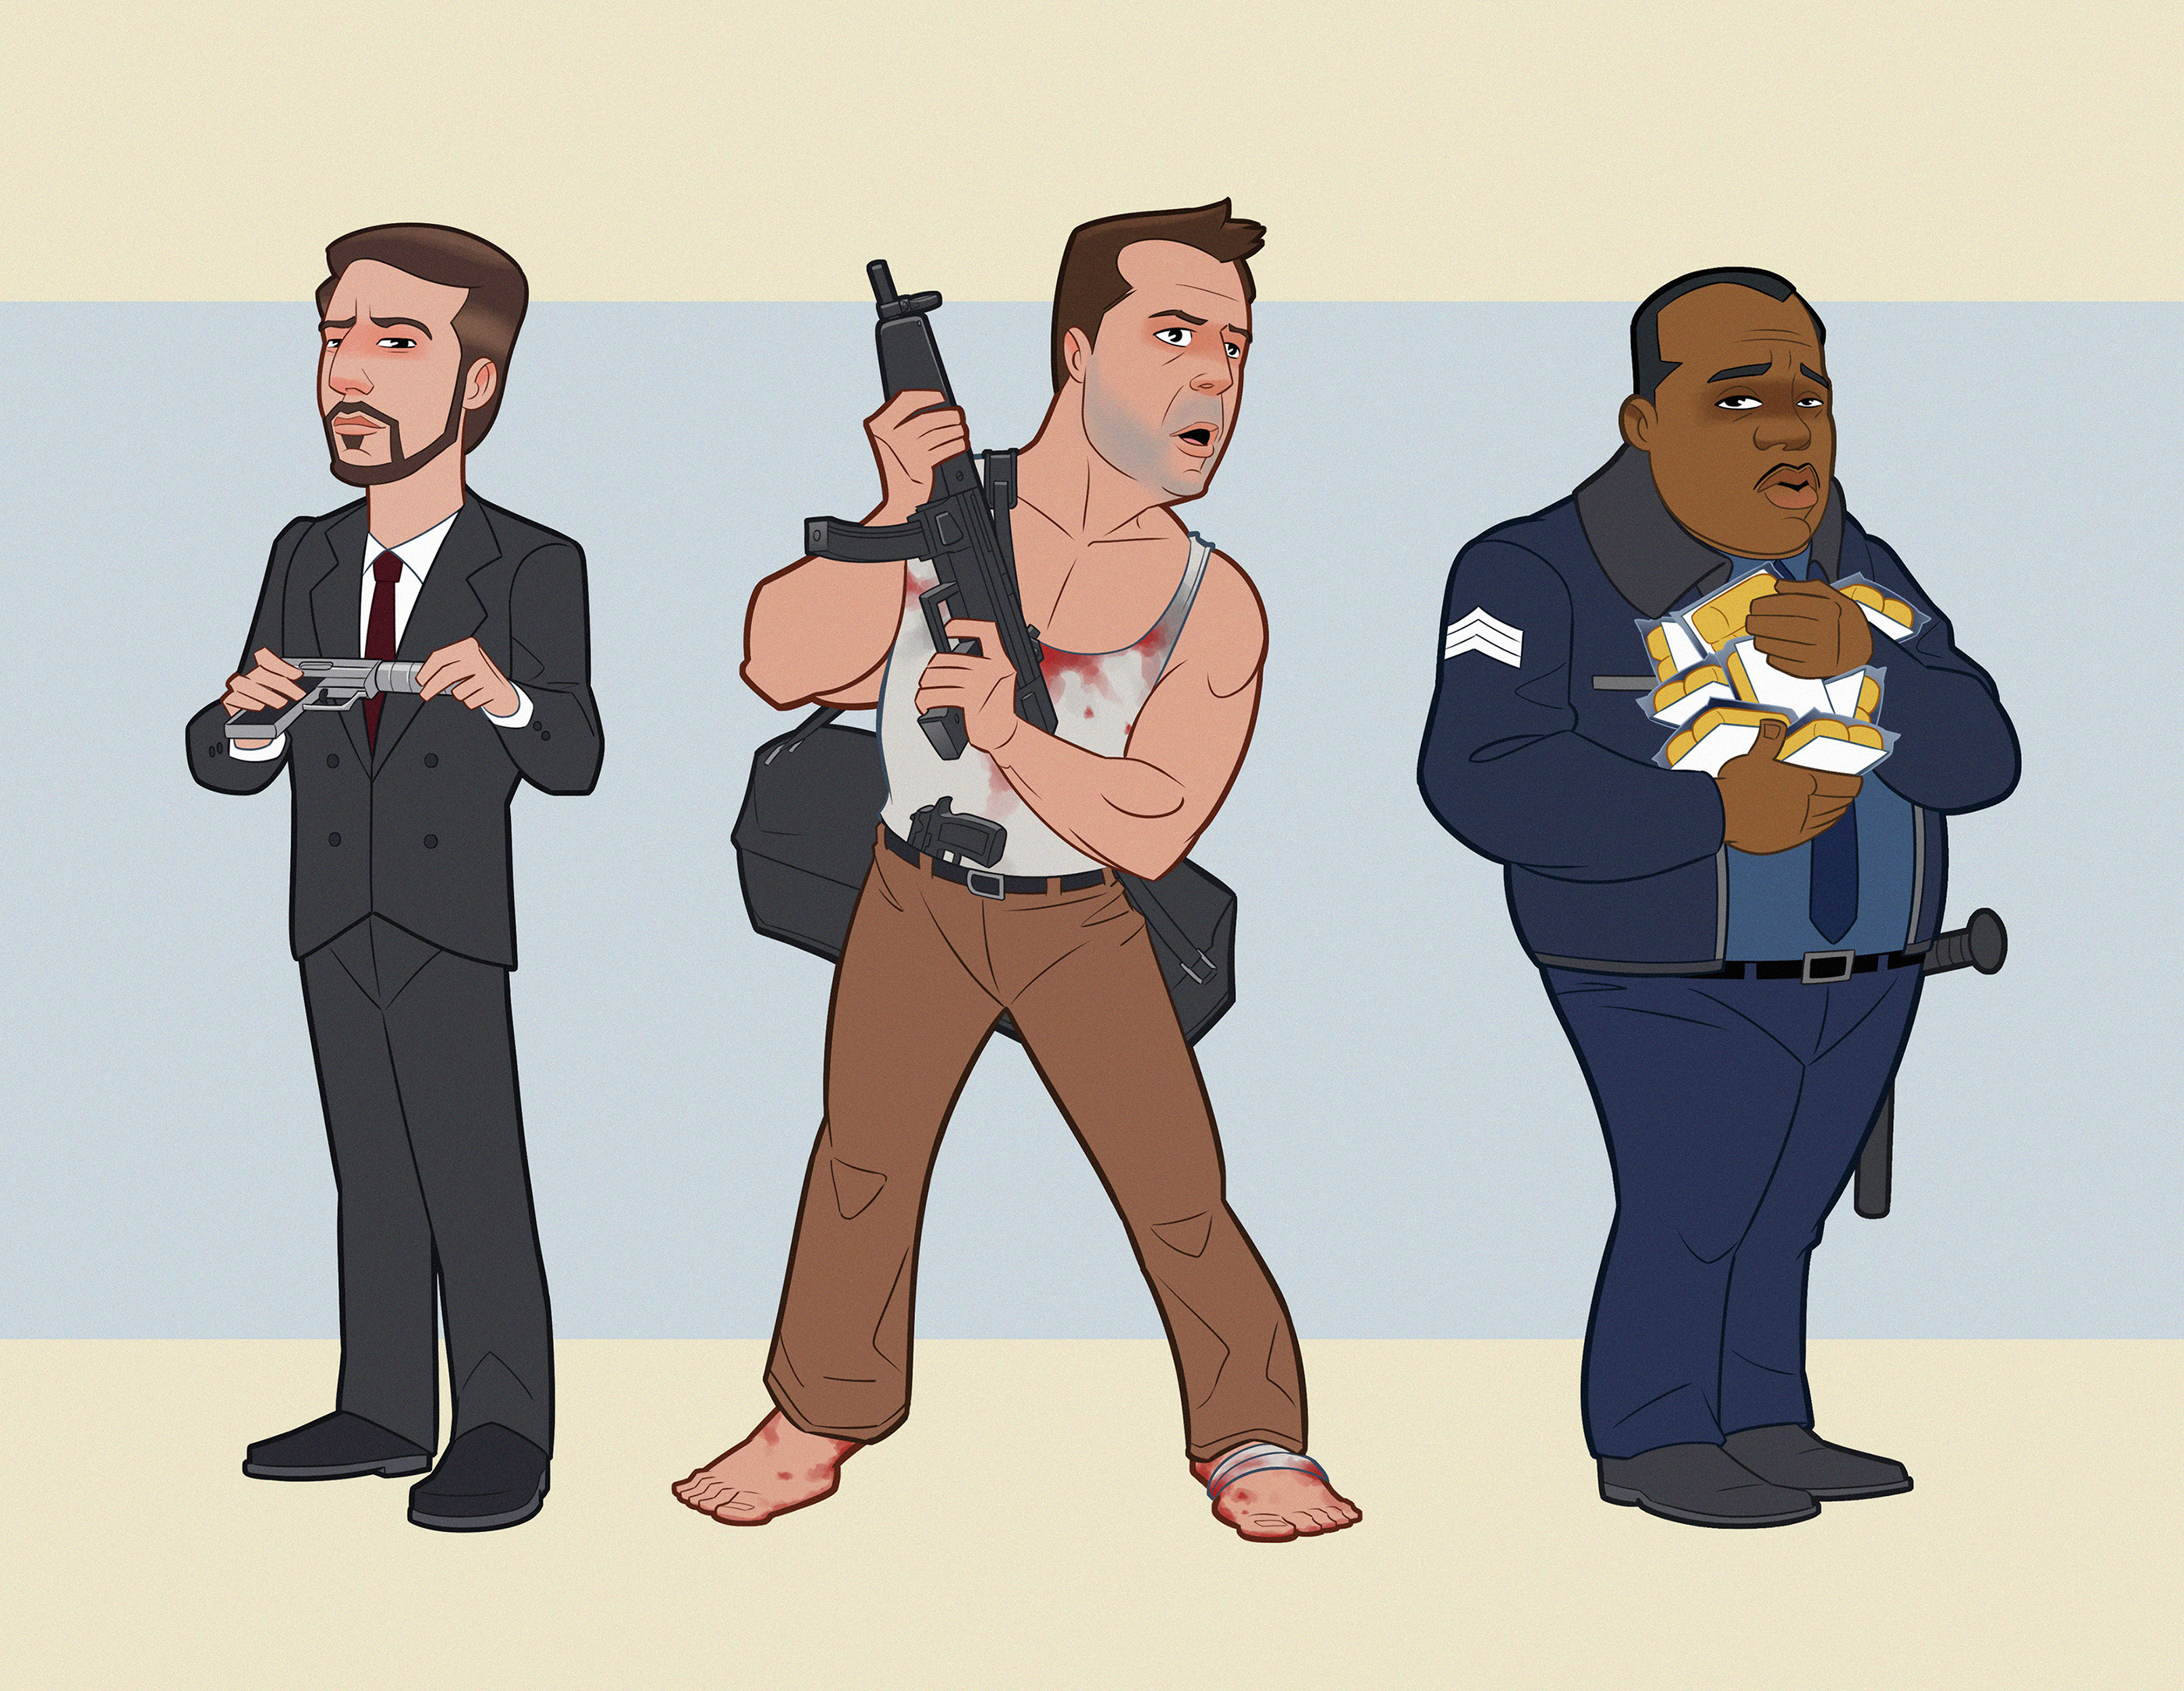 Die Hard: The Animated Series on Behance